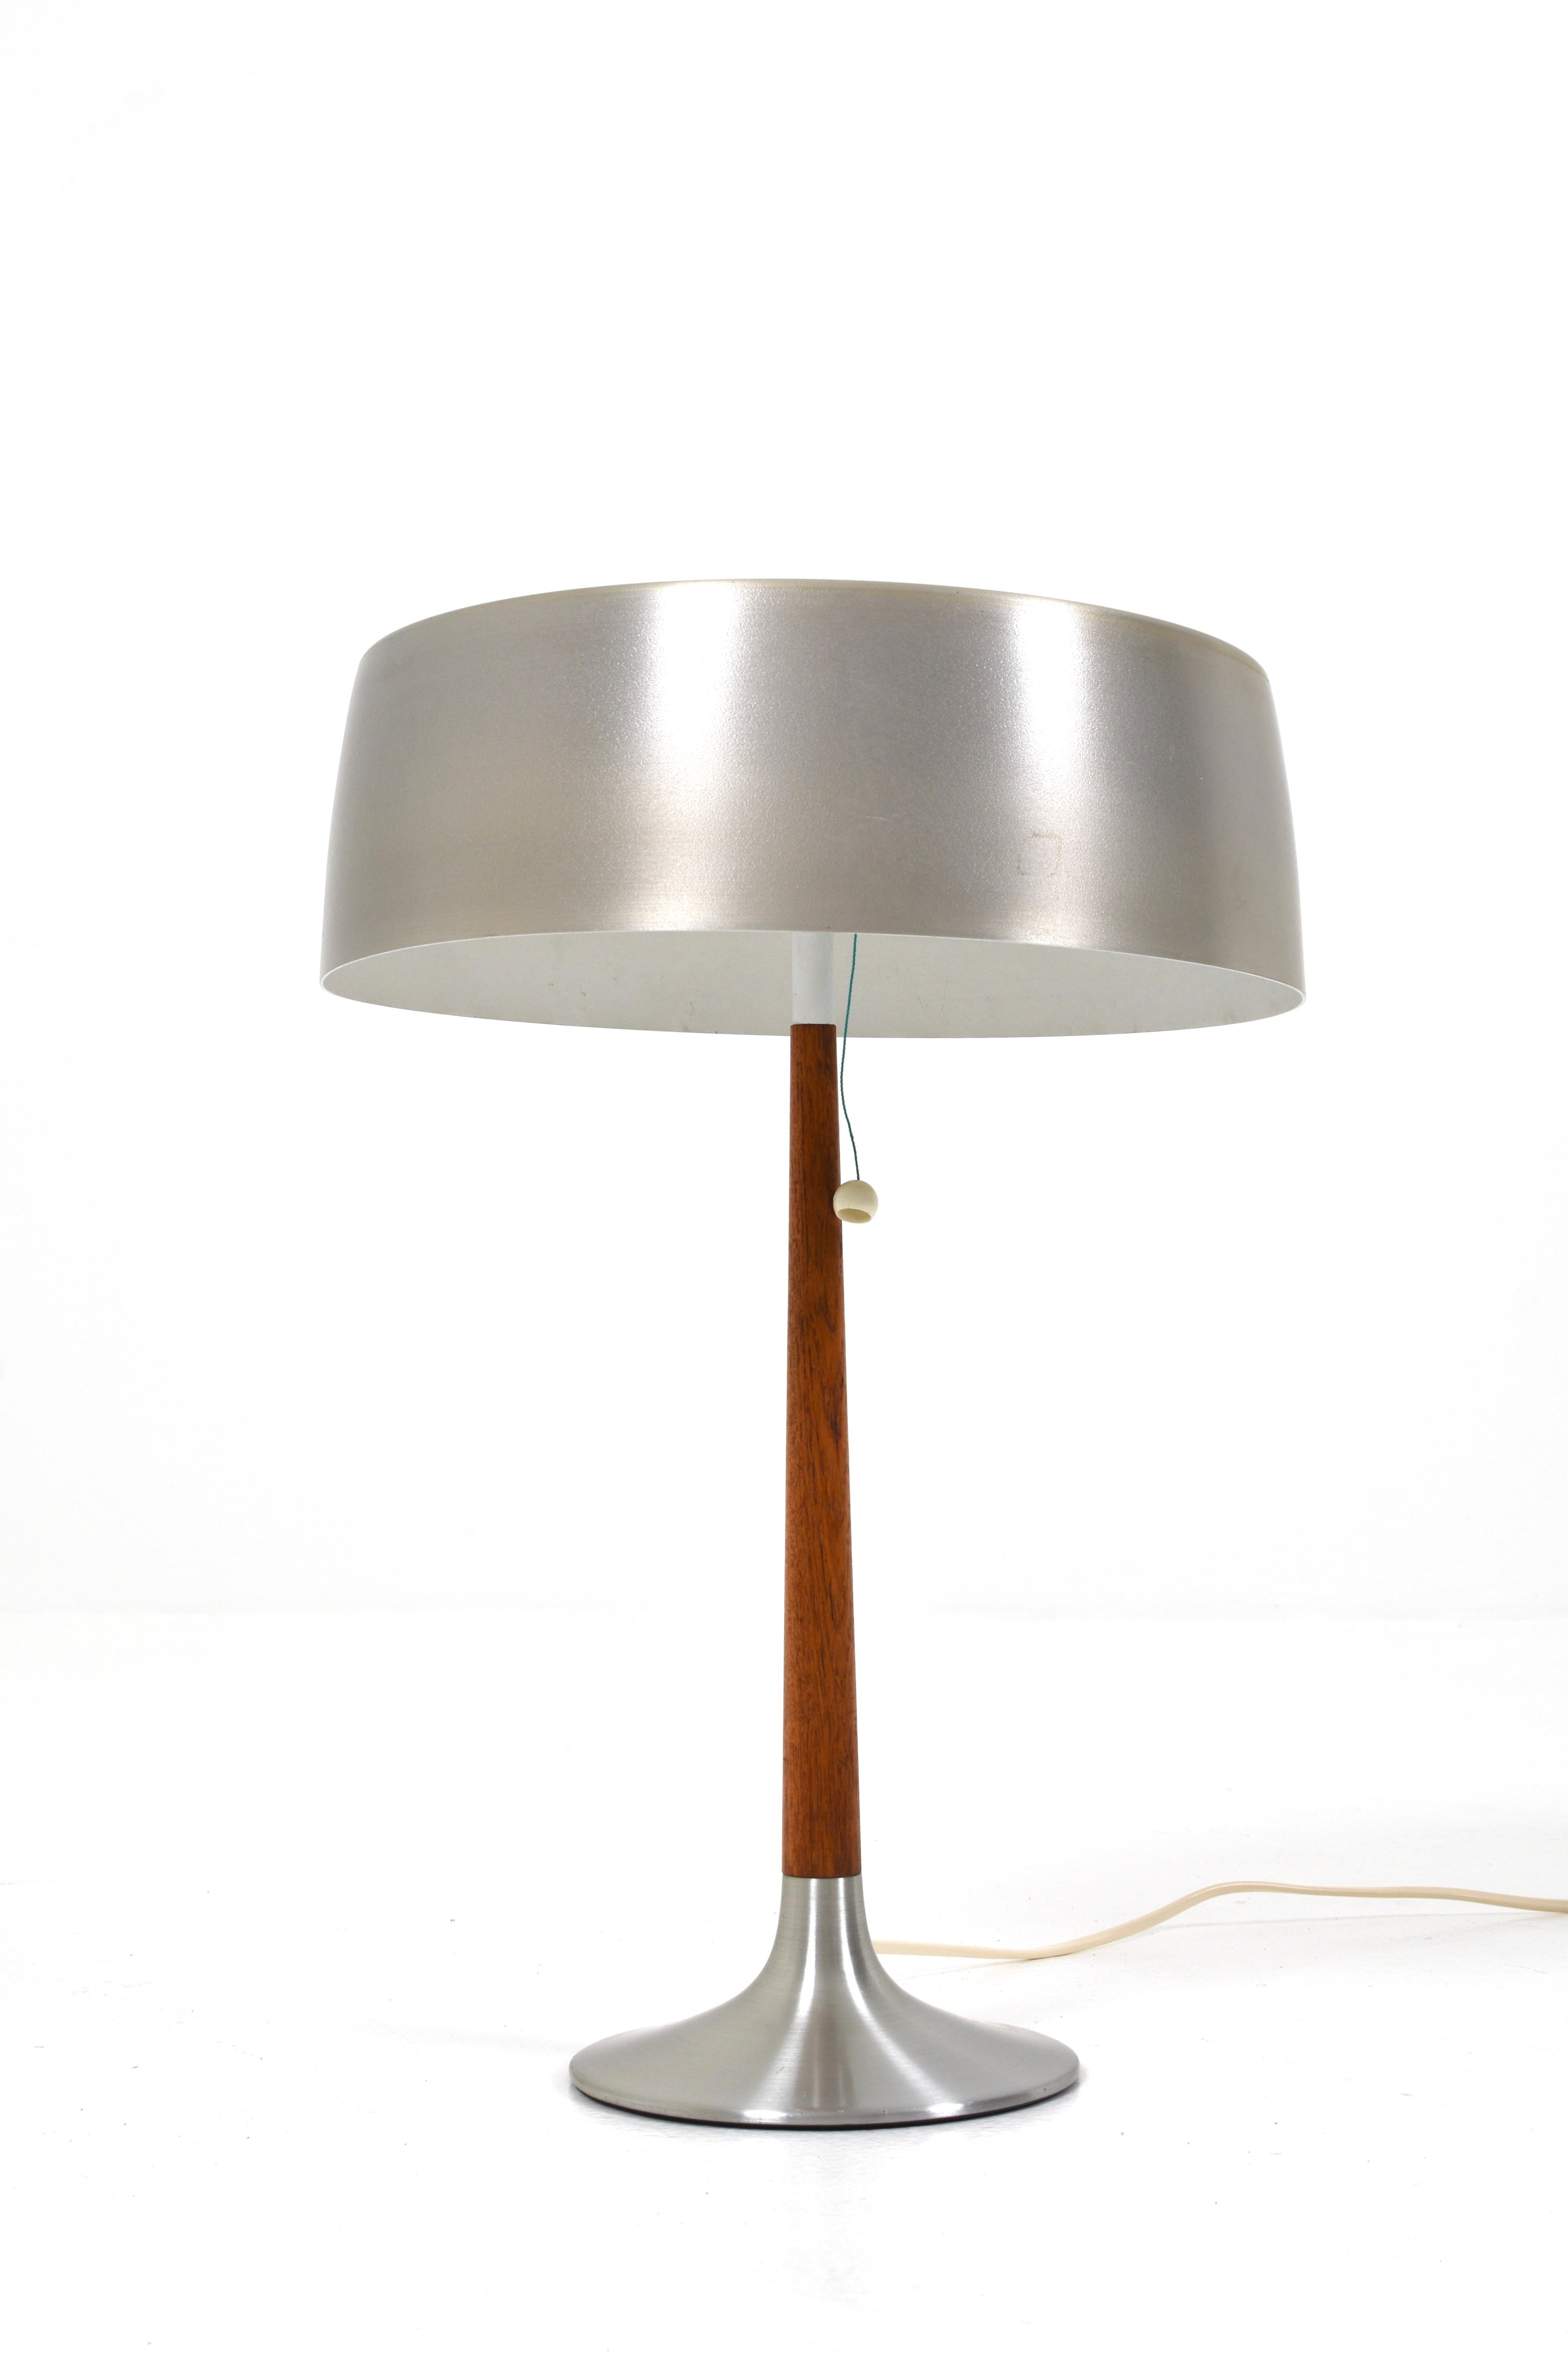 The lamp has an elegant and stylish design, made of brushed aluminum and teak. The lamp's screen has some wear from use.